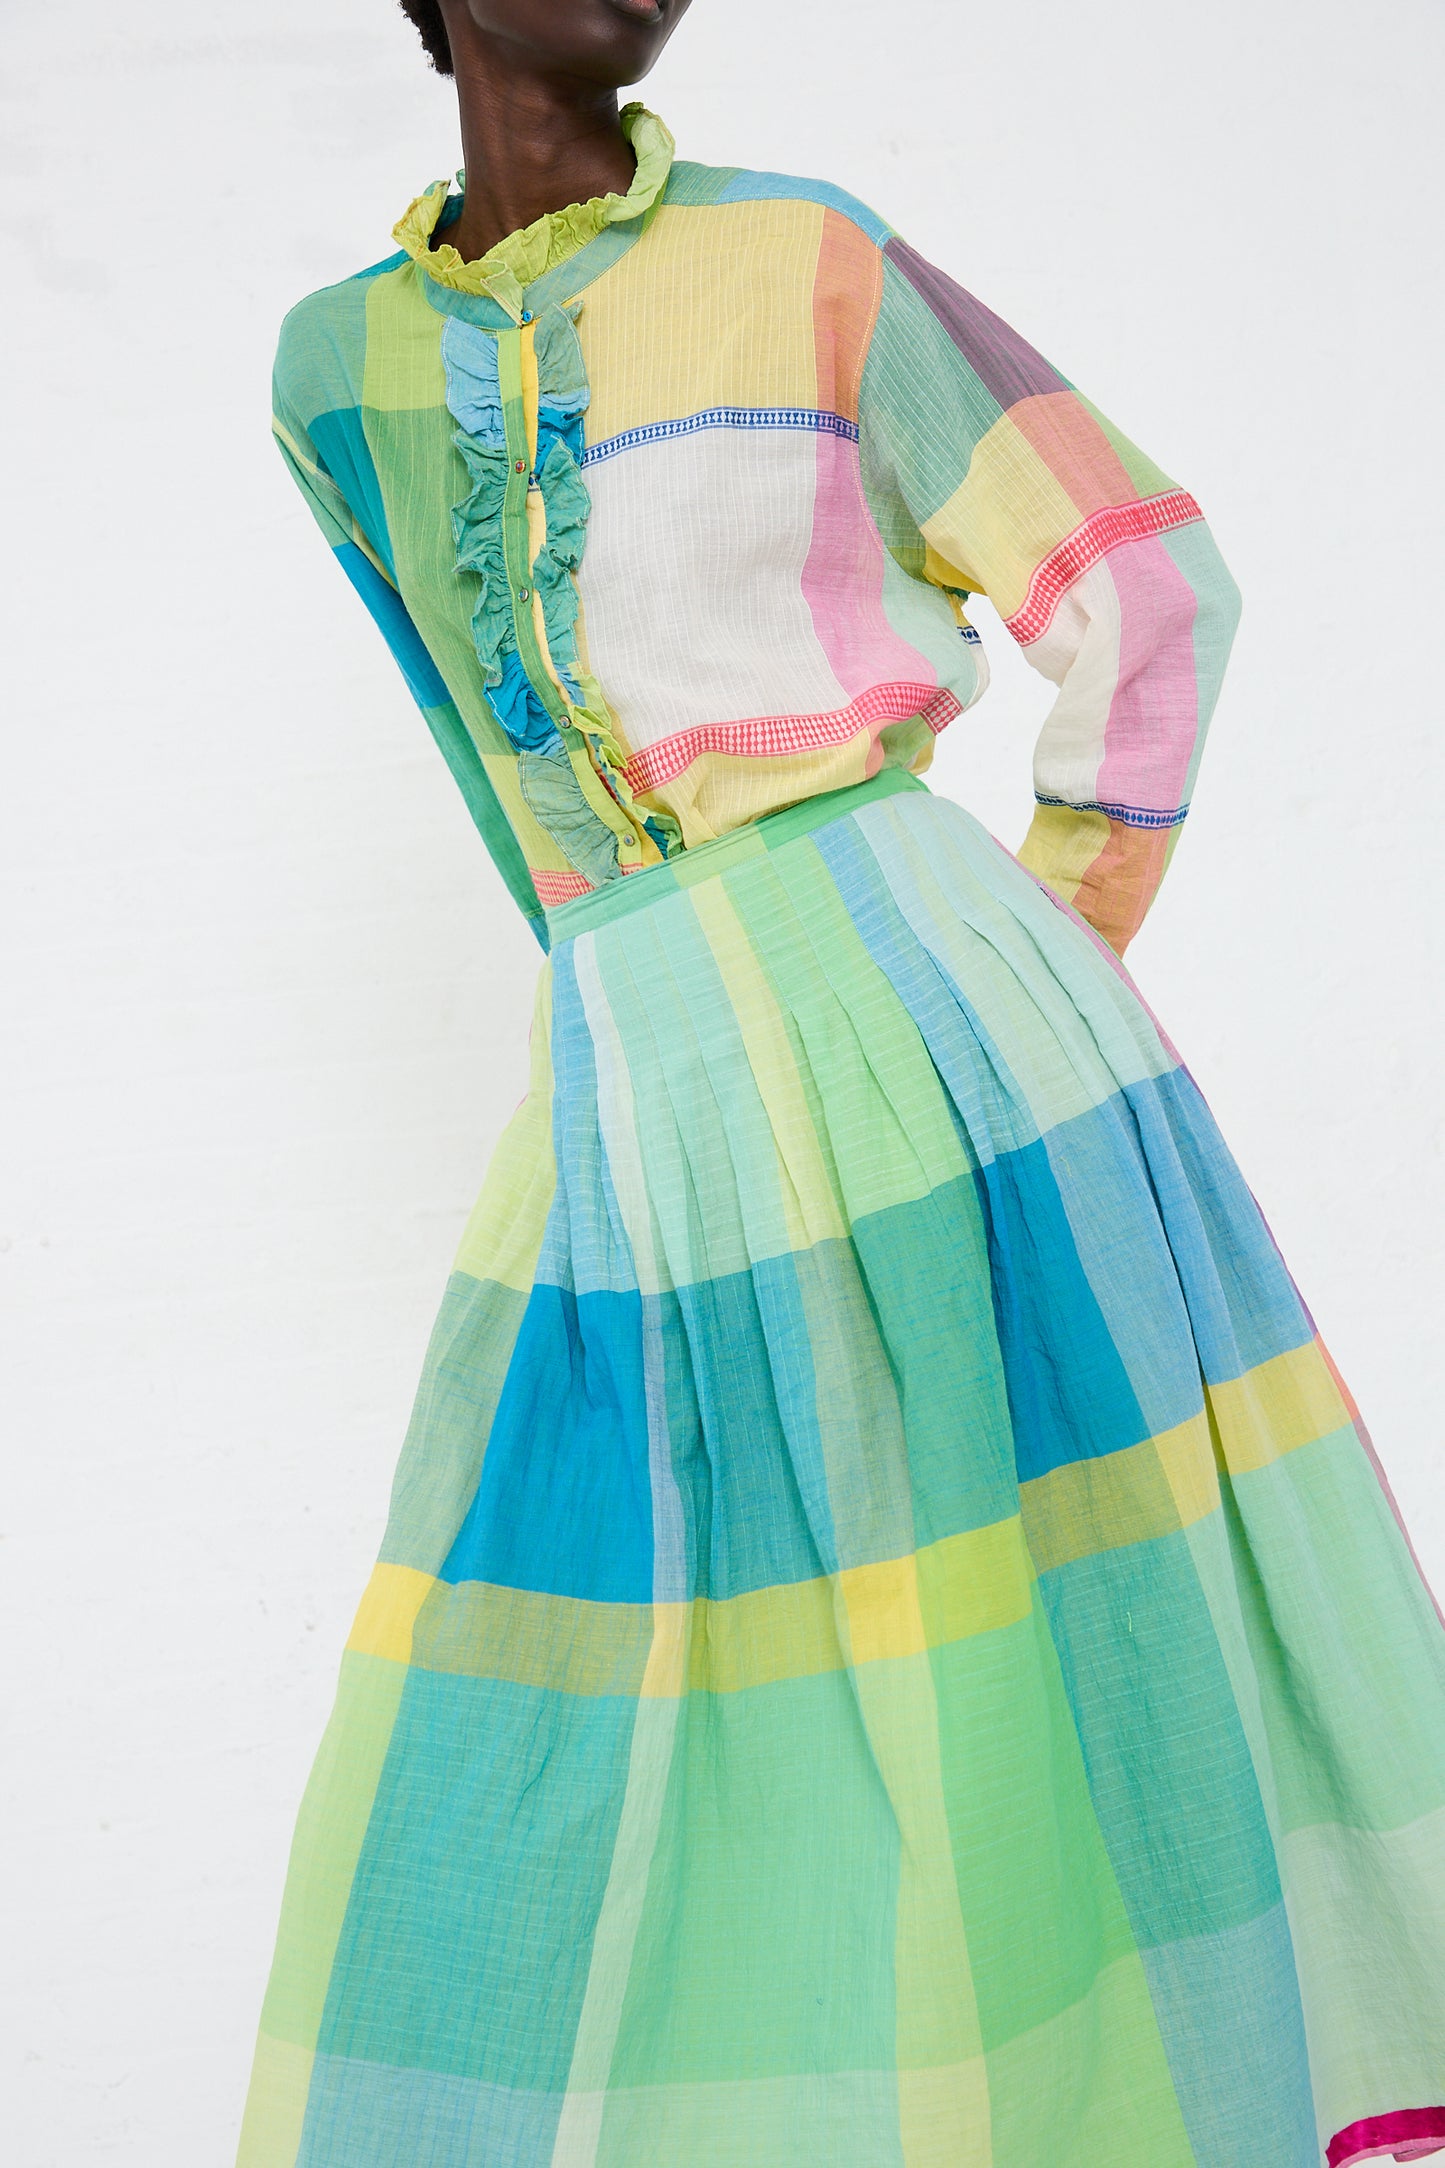 A person models an Injiri Cotton Shirt in Green, Yellow and Pink Check with a ruffled neckline and pleated skirt, standing against a white background.